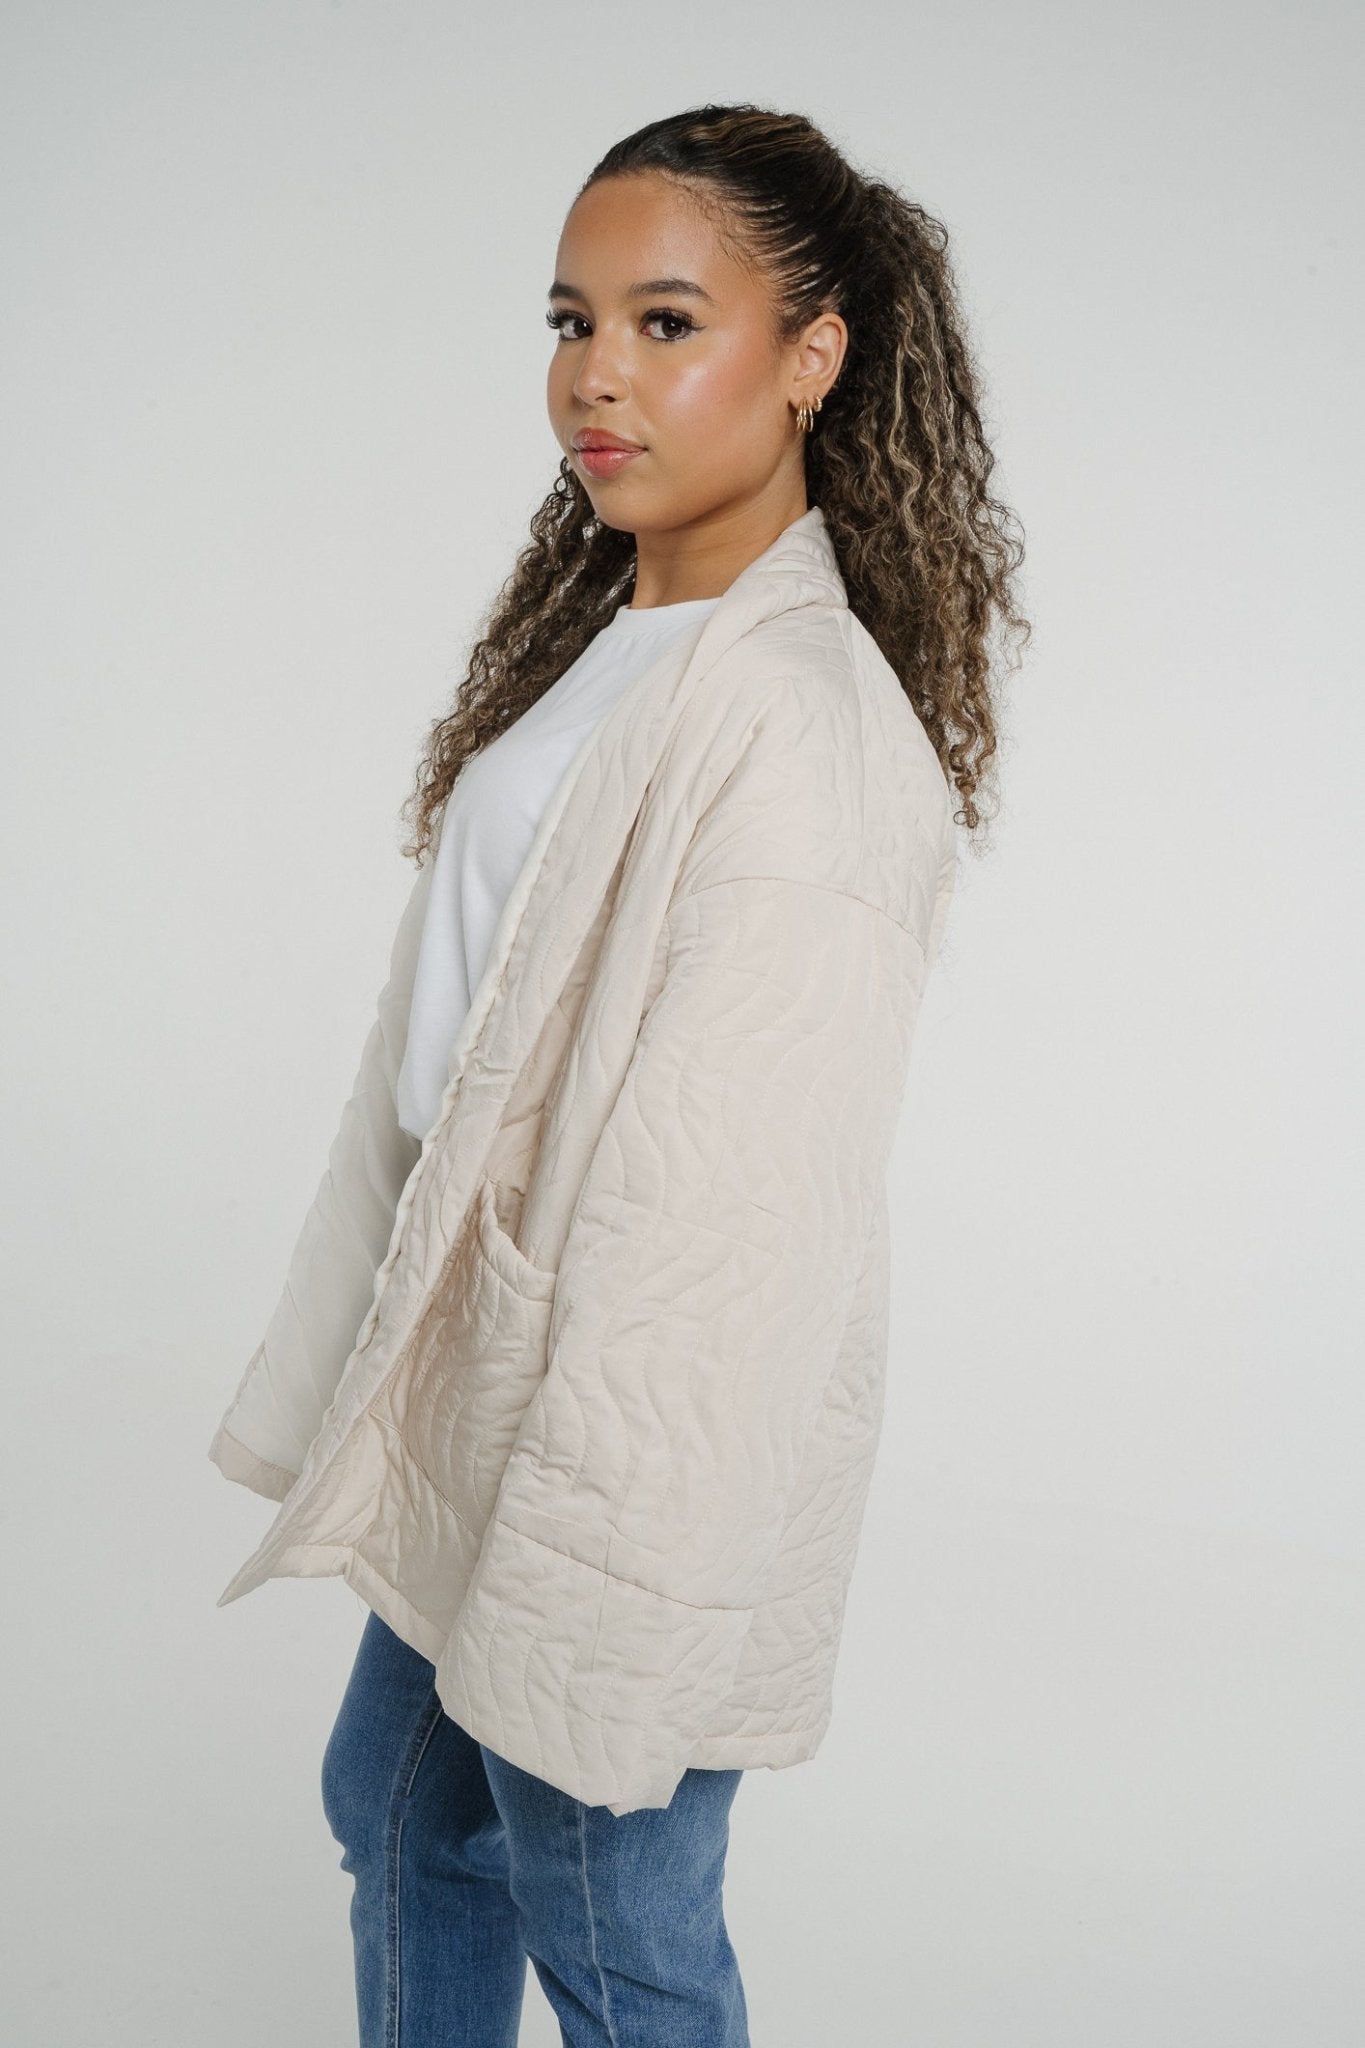 Ivy Quilted Jacket In Cream - The Walk in Wardrobe